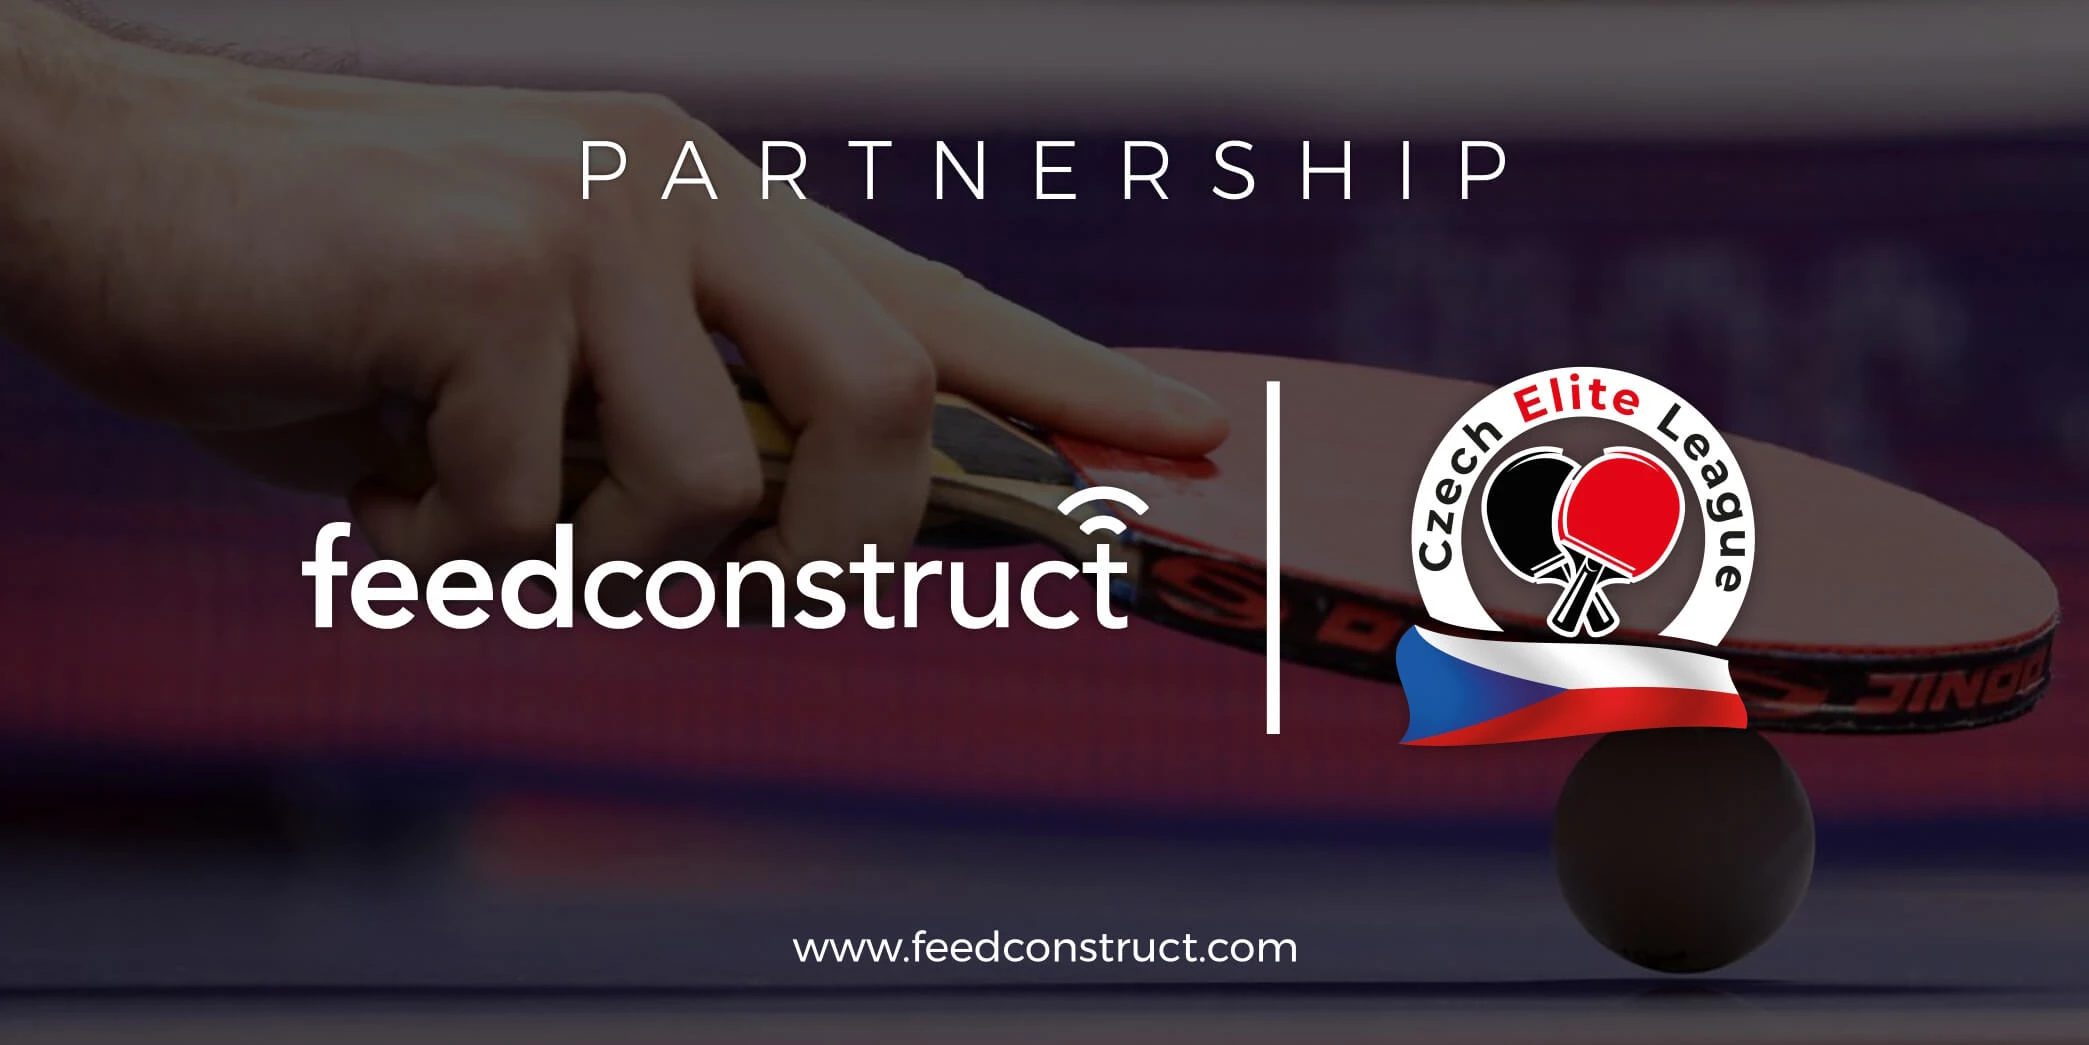 FeedConstruct becomes the exclusive content provider of the Czech Elite League